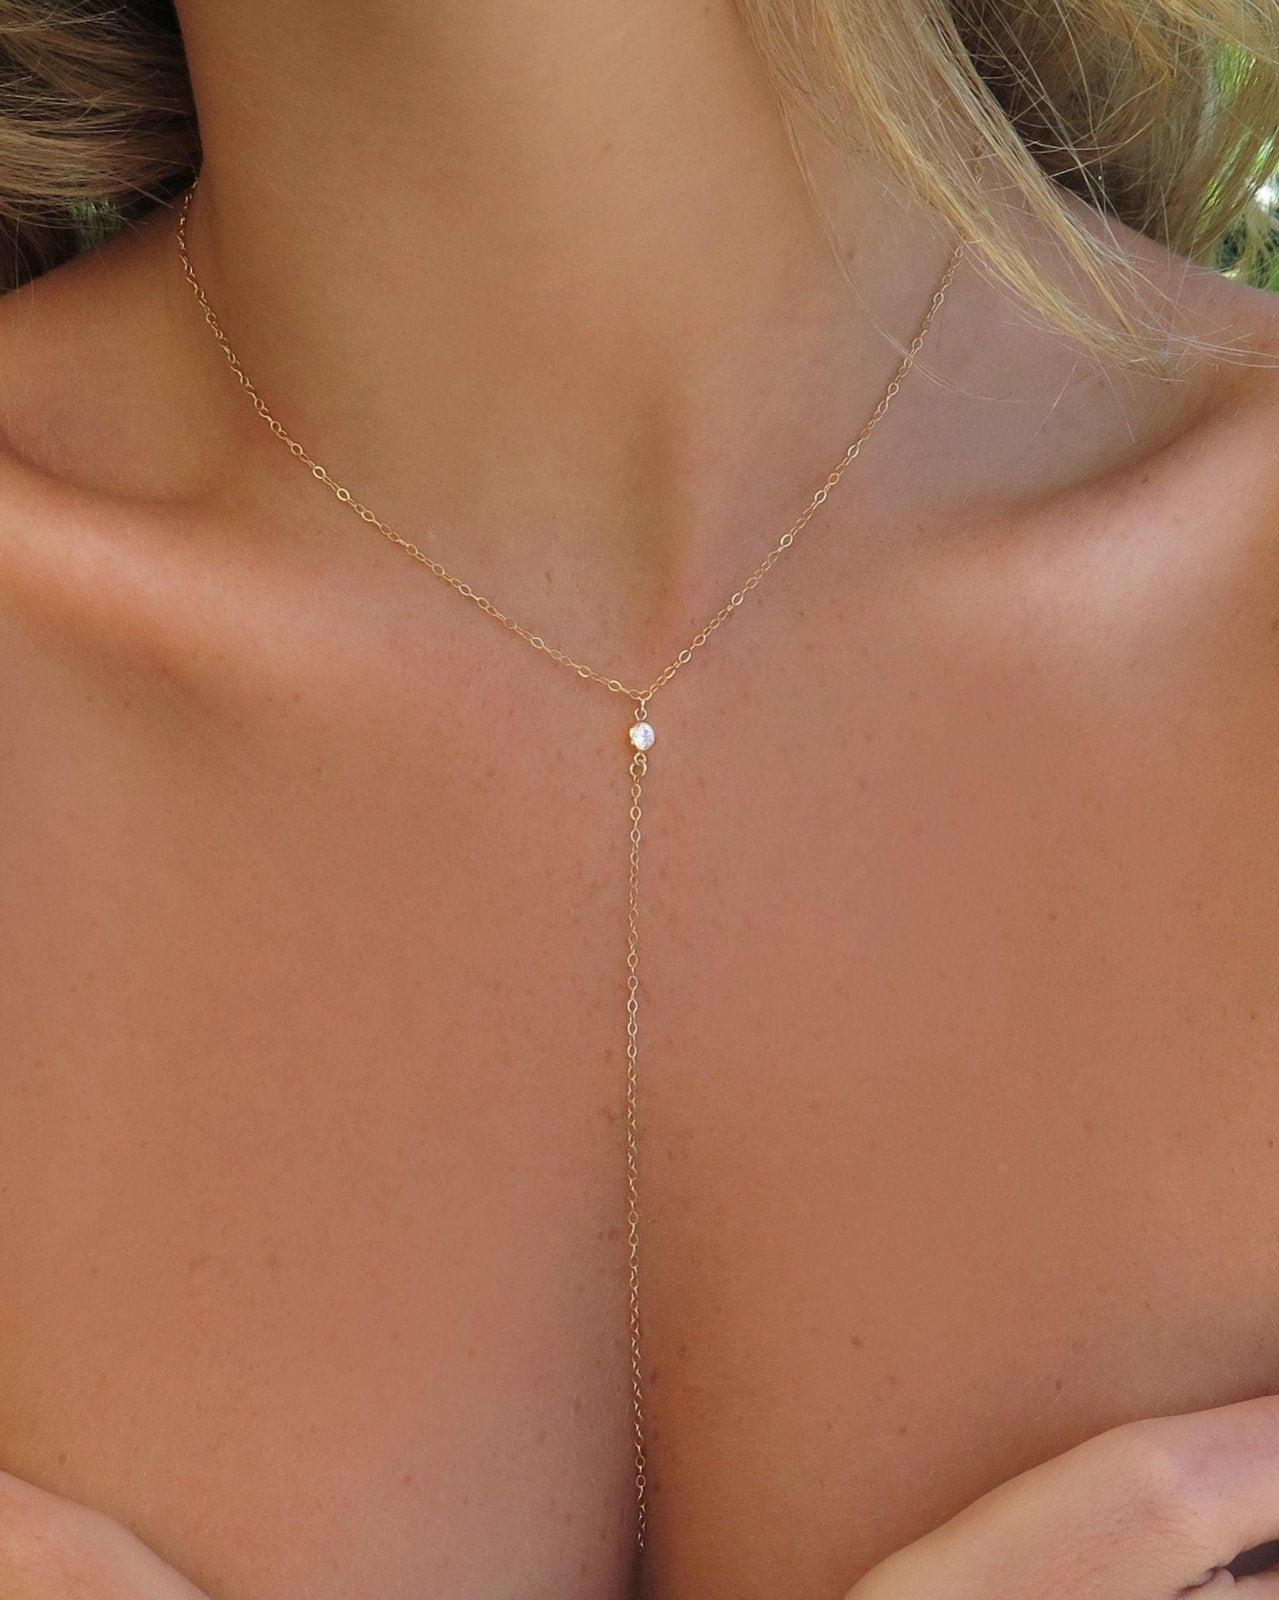 CZ DROP NECKLACE - The Littl - 14k Yellow Gold Fill - Deluxe Chain